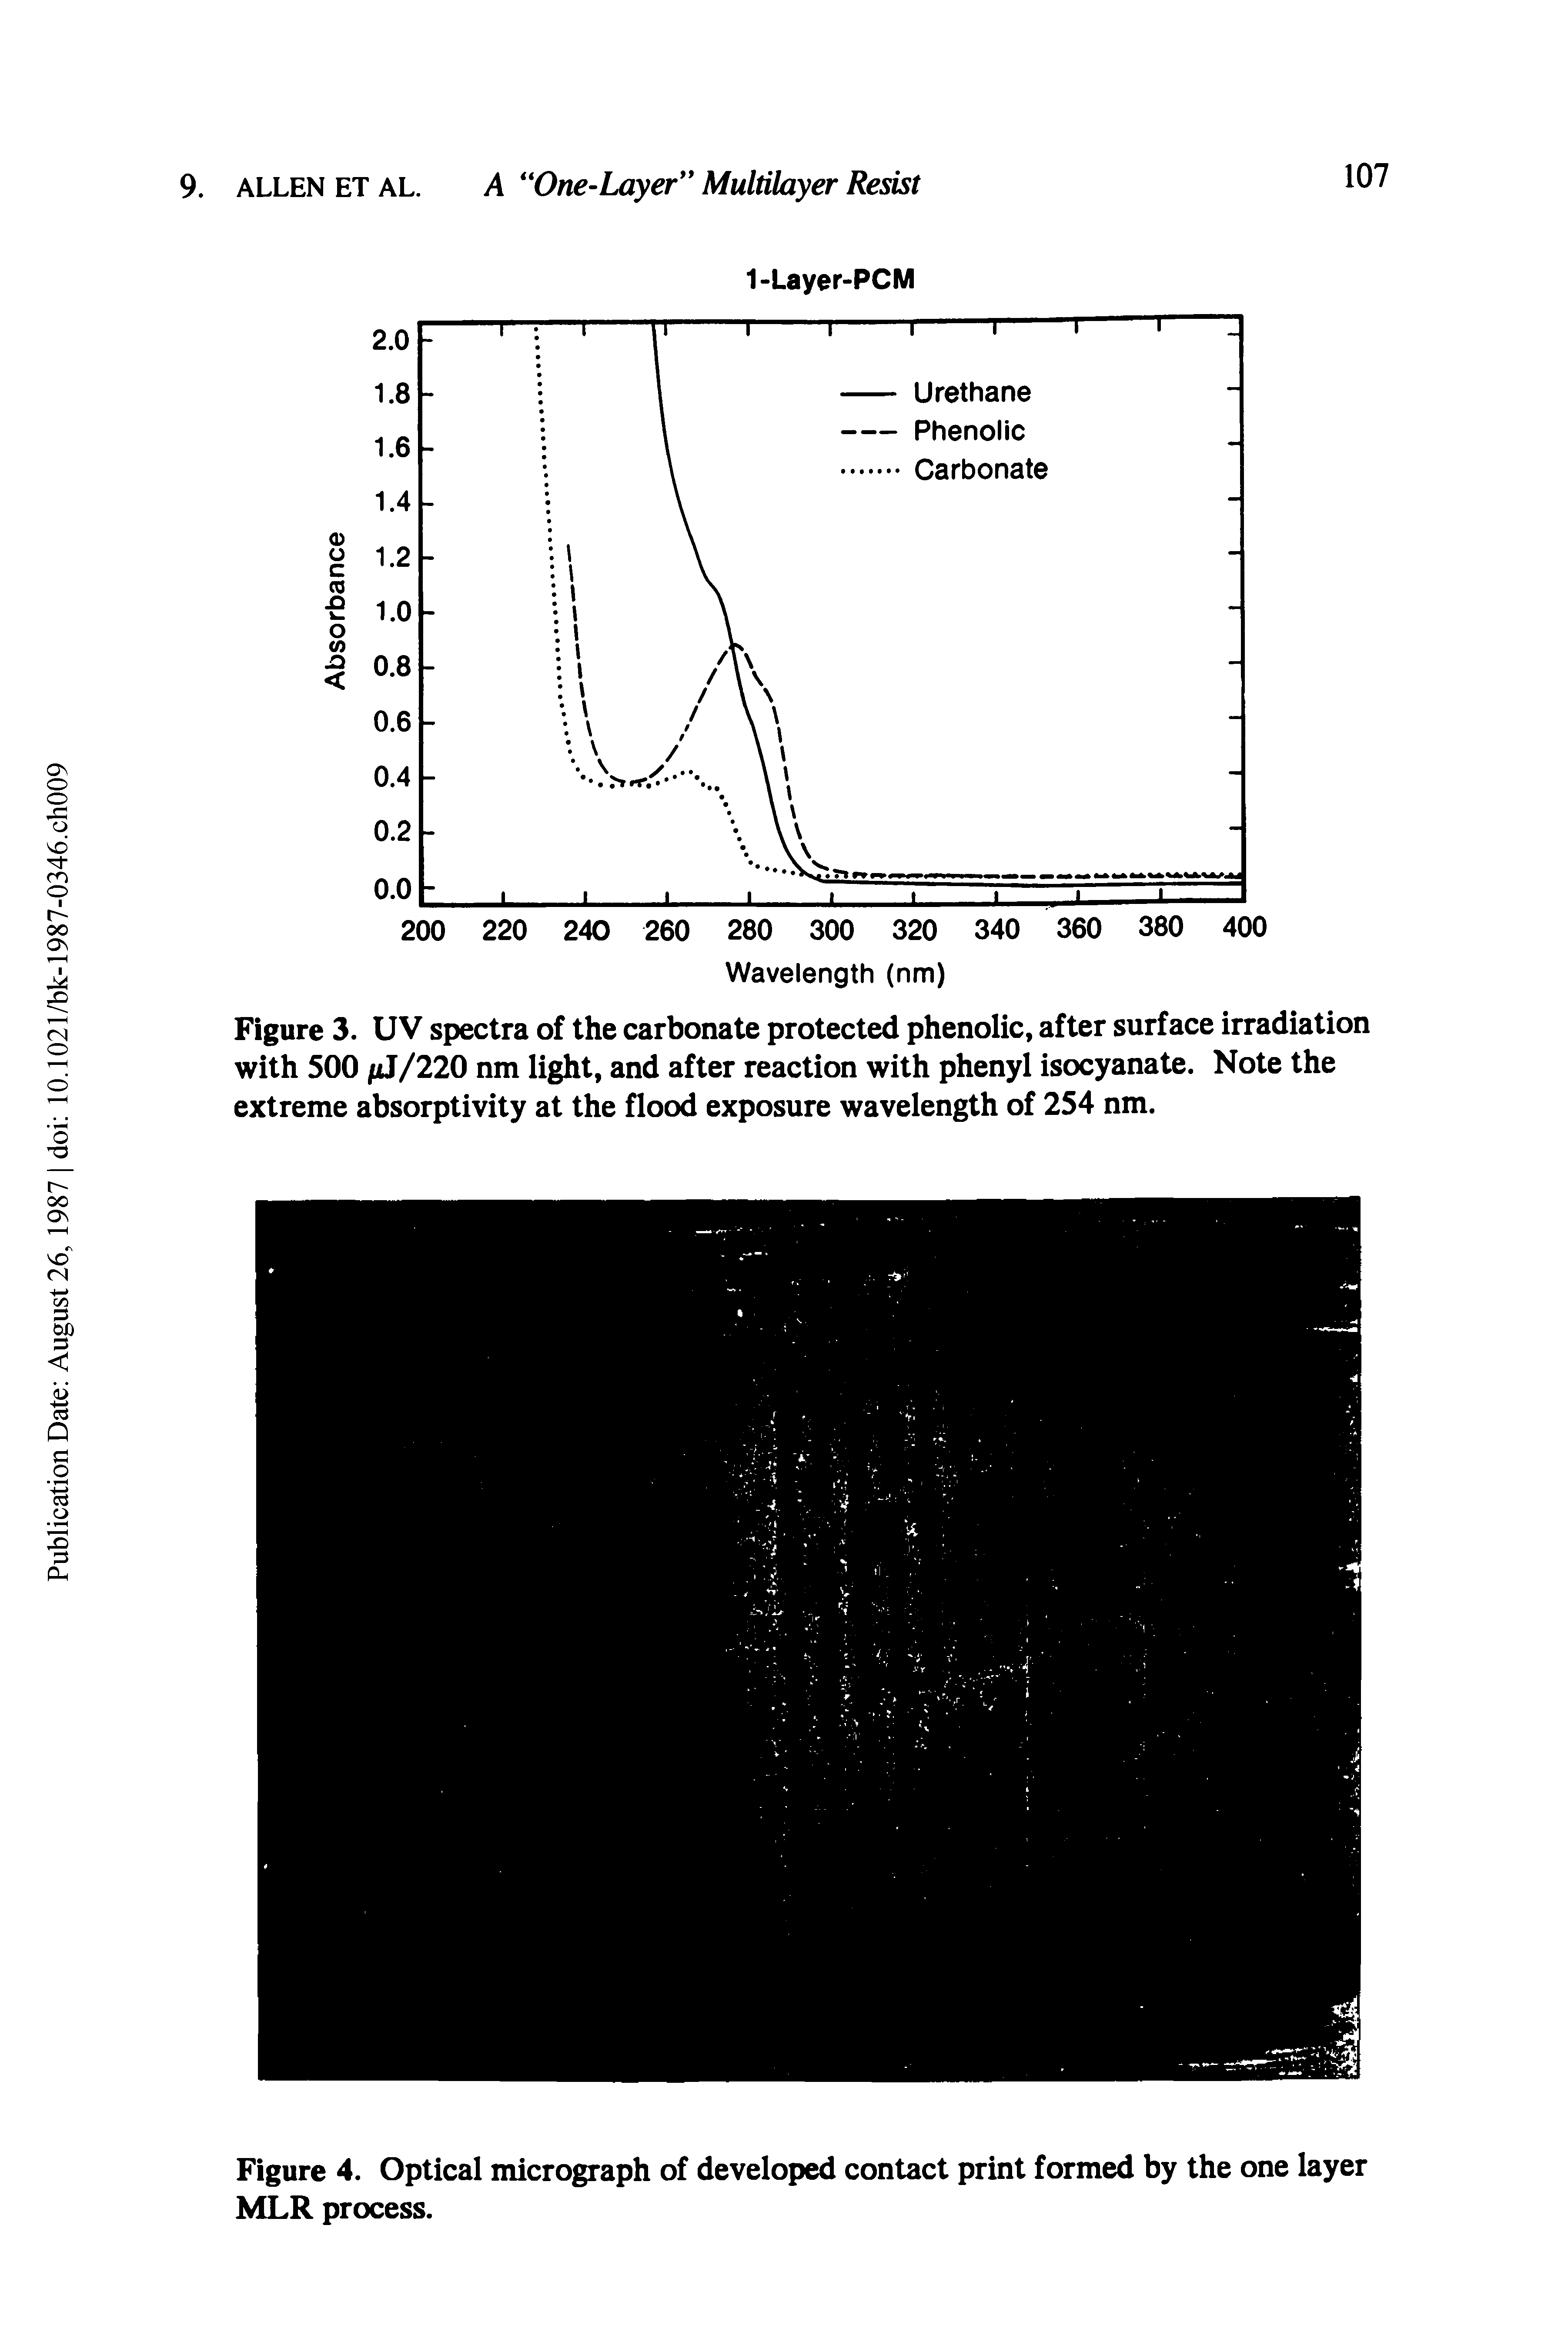 Figure 3. UV spectra of the carbonate protected phenolic, after surface irradiation with 500 fjJ/220 nm light, and after reaction with phenyl isocyanate. Note the extreme absorptivity at the flood exposure wavelength of 254 nm.